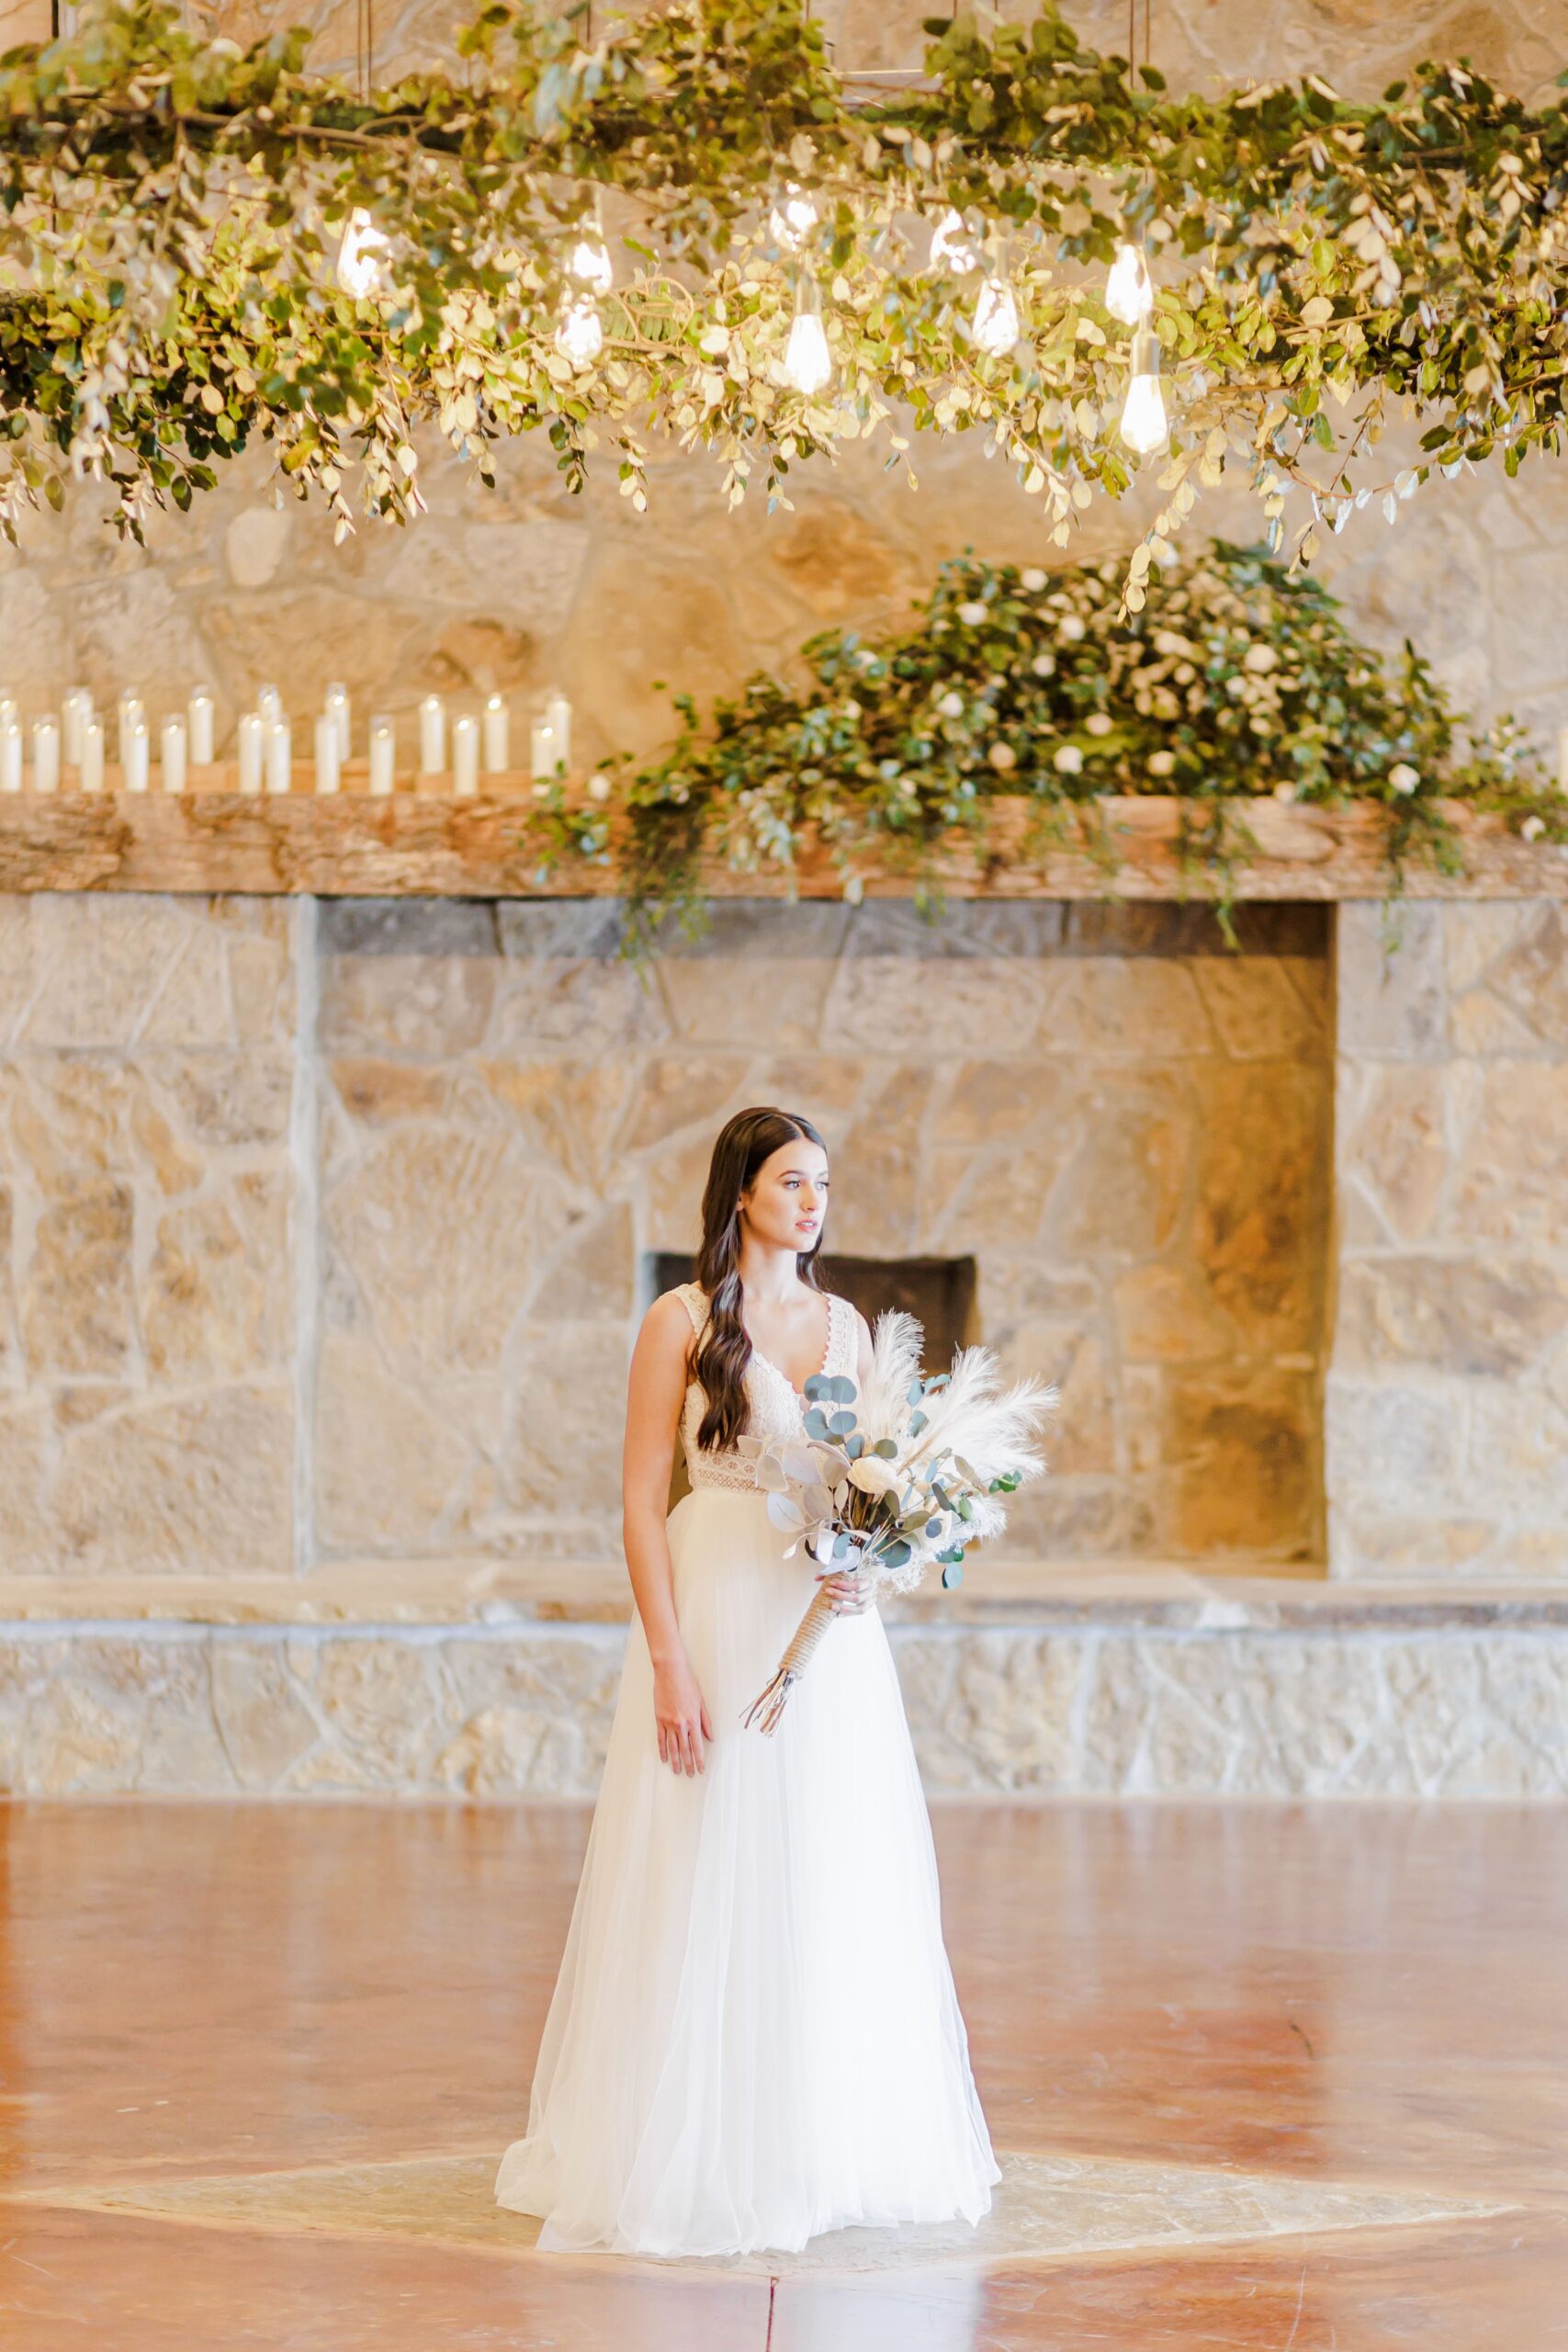 A beautiful bride stands in the middle of a decorated room holding a bouquet of flowers. 